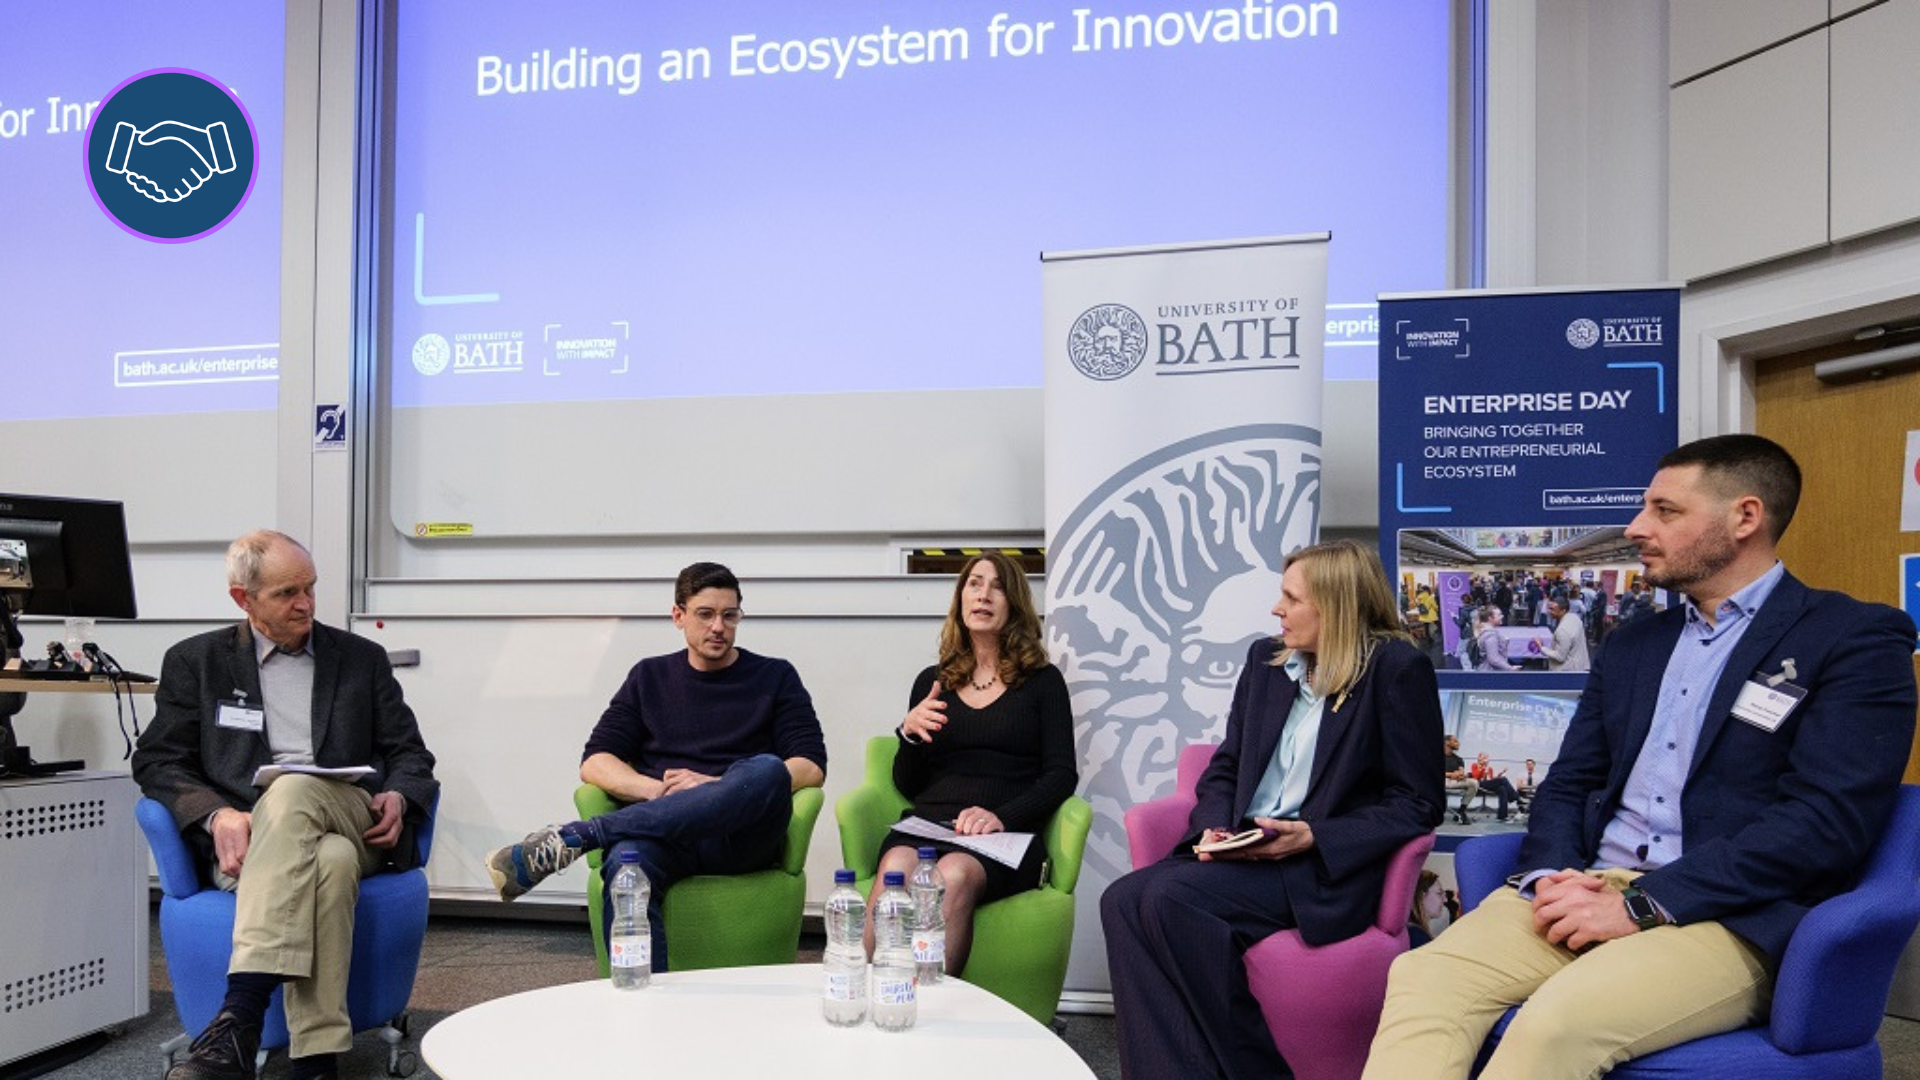 Left to right: Prof Jonathan Knight, VP Enterprise; Dr Harry Destecroix, Science Creates Founder; Prof Millie Stone, Royal Society Entrepreneur in Residence; Andrea Kelly, Innovation Centre Manager; Remy Foucher, Relationship Manager, Santander. 